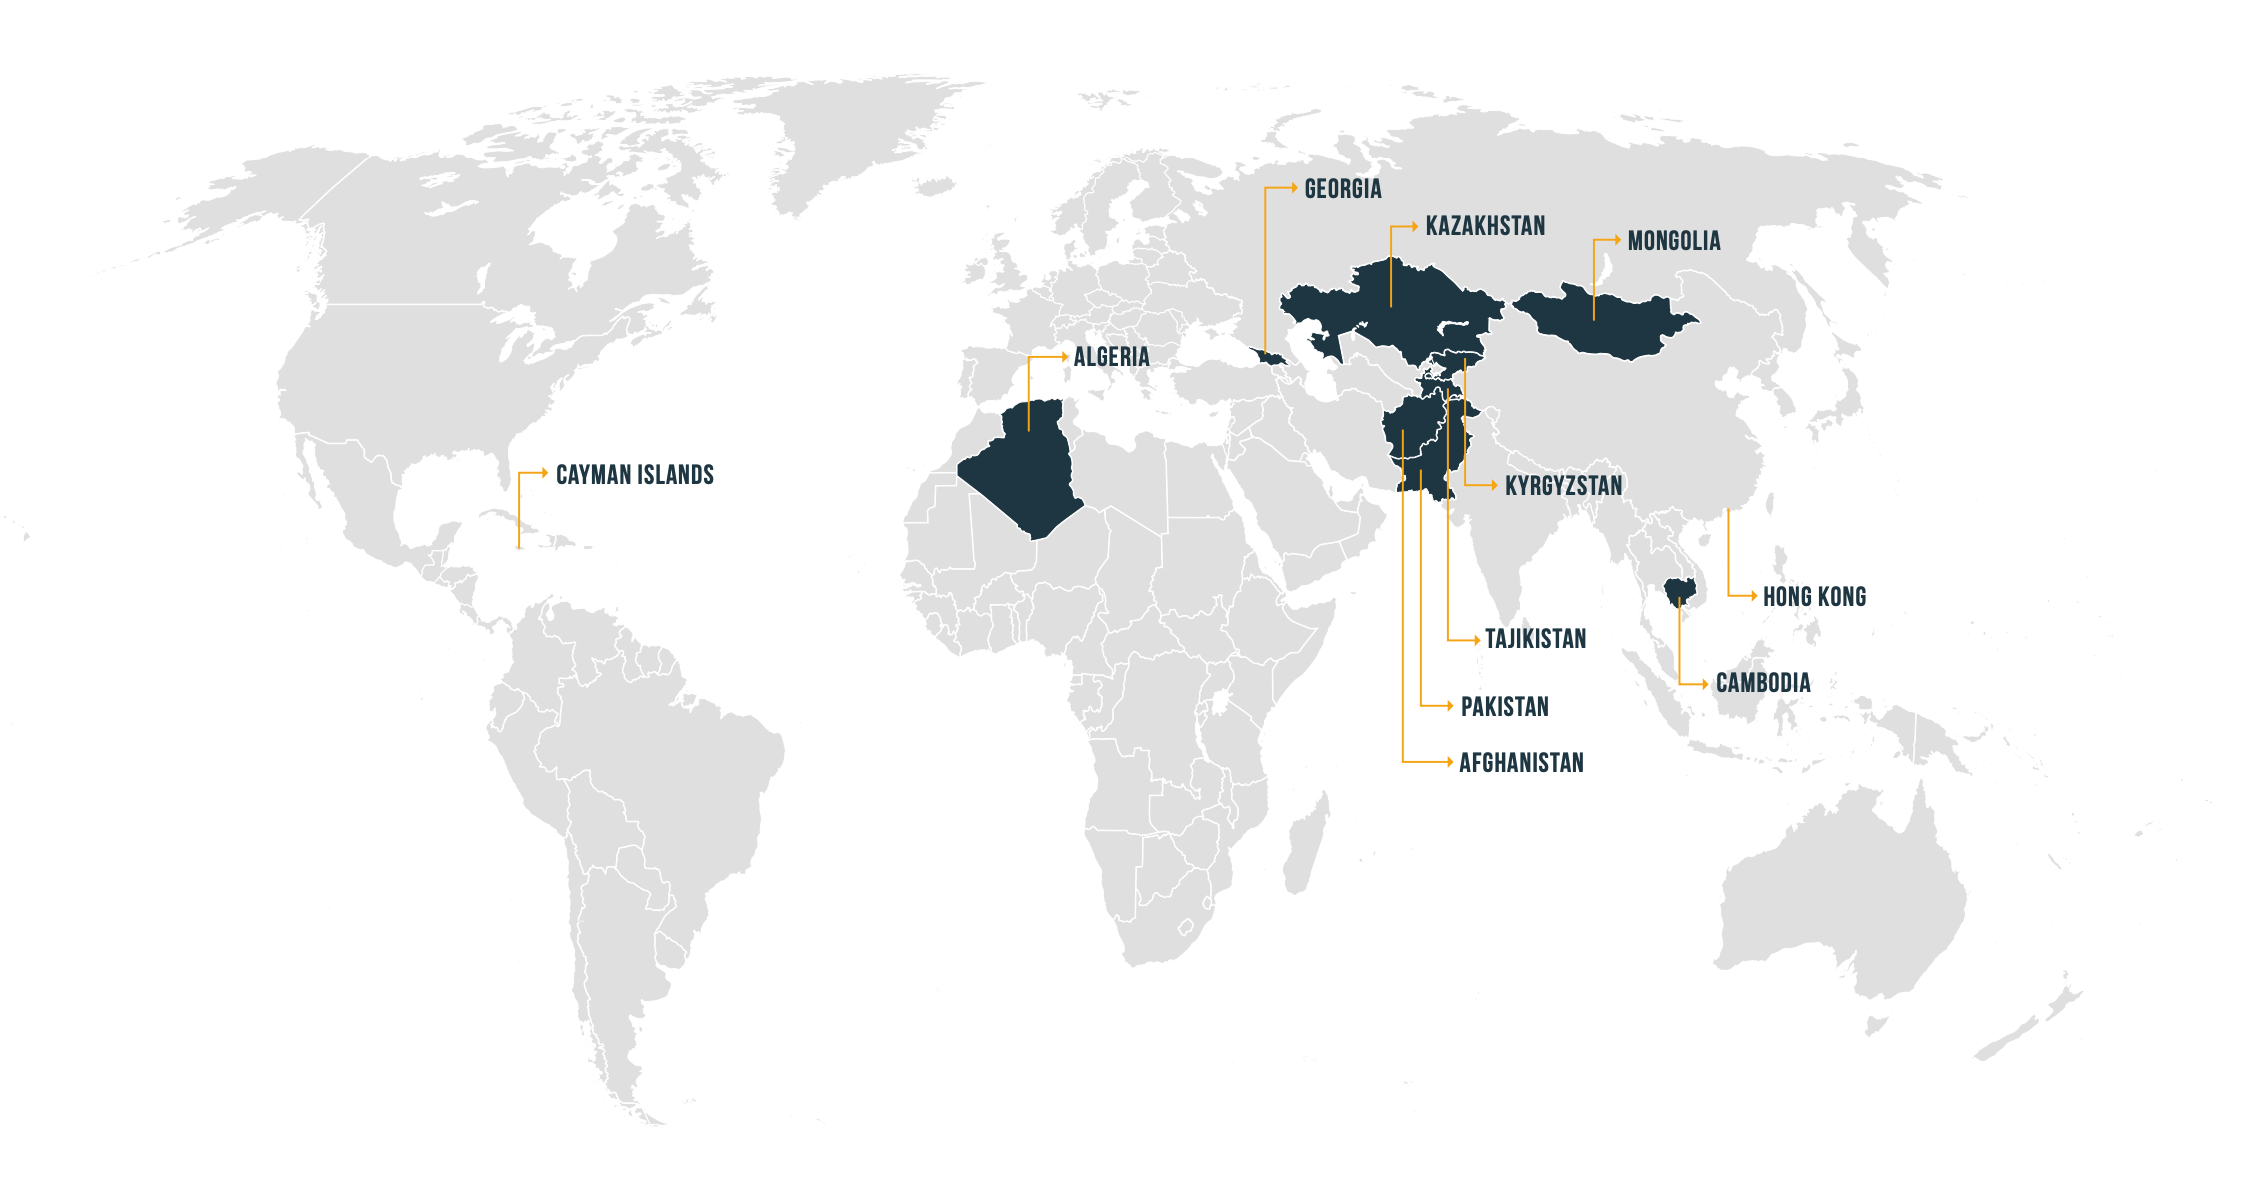 XPCC FOREIGN SUBSIDIARY LOCATIONS